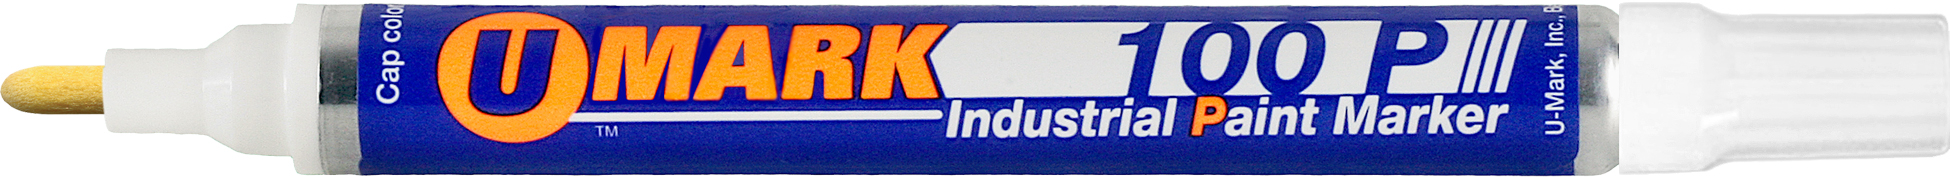 INDUSTRIAL WHITE PAINT MARKER by U-MARK